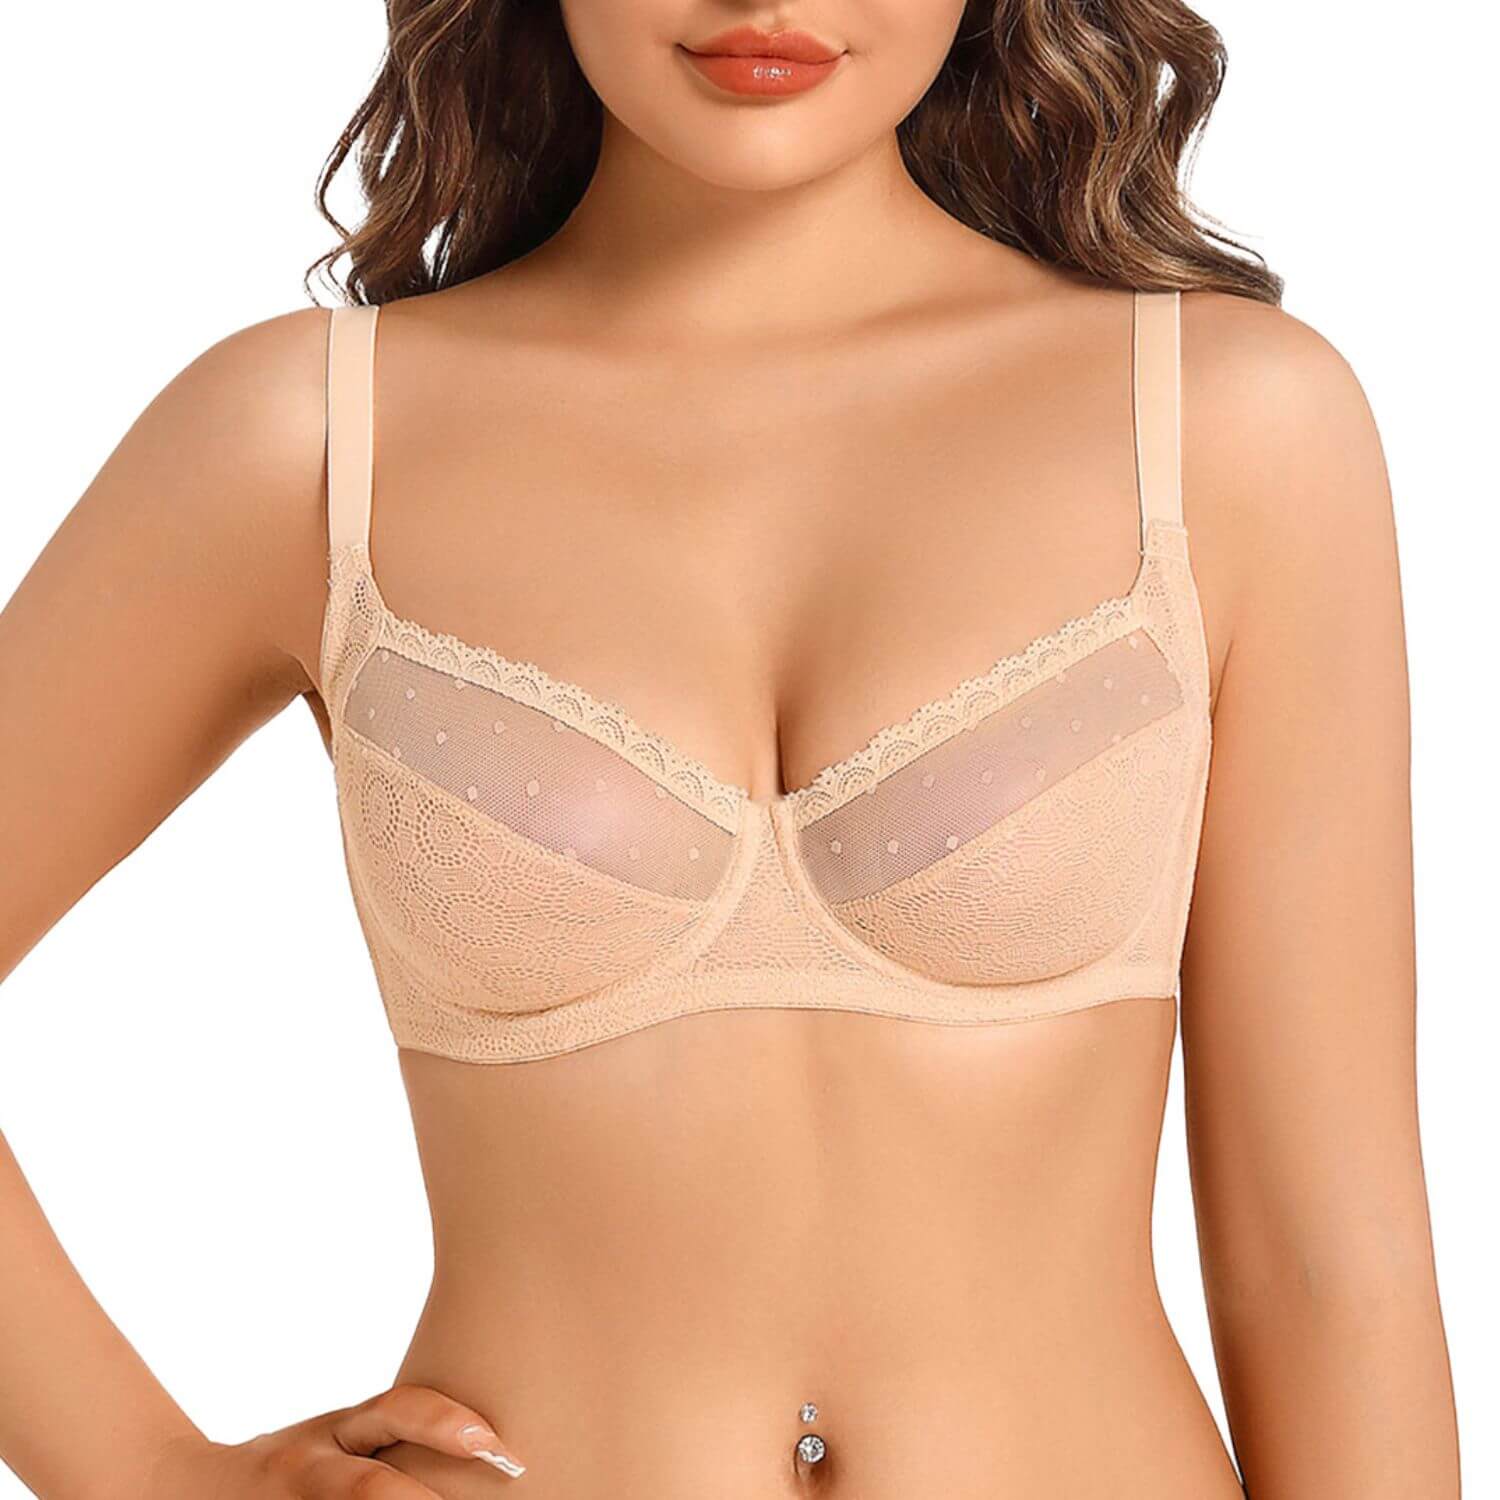 Unlined Sexy Sheer Mesh Lace Balconette Bra Plus Size